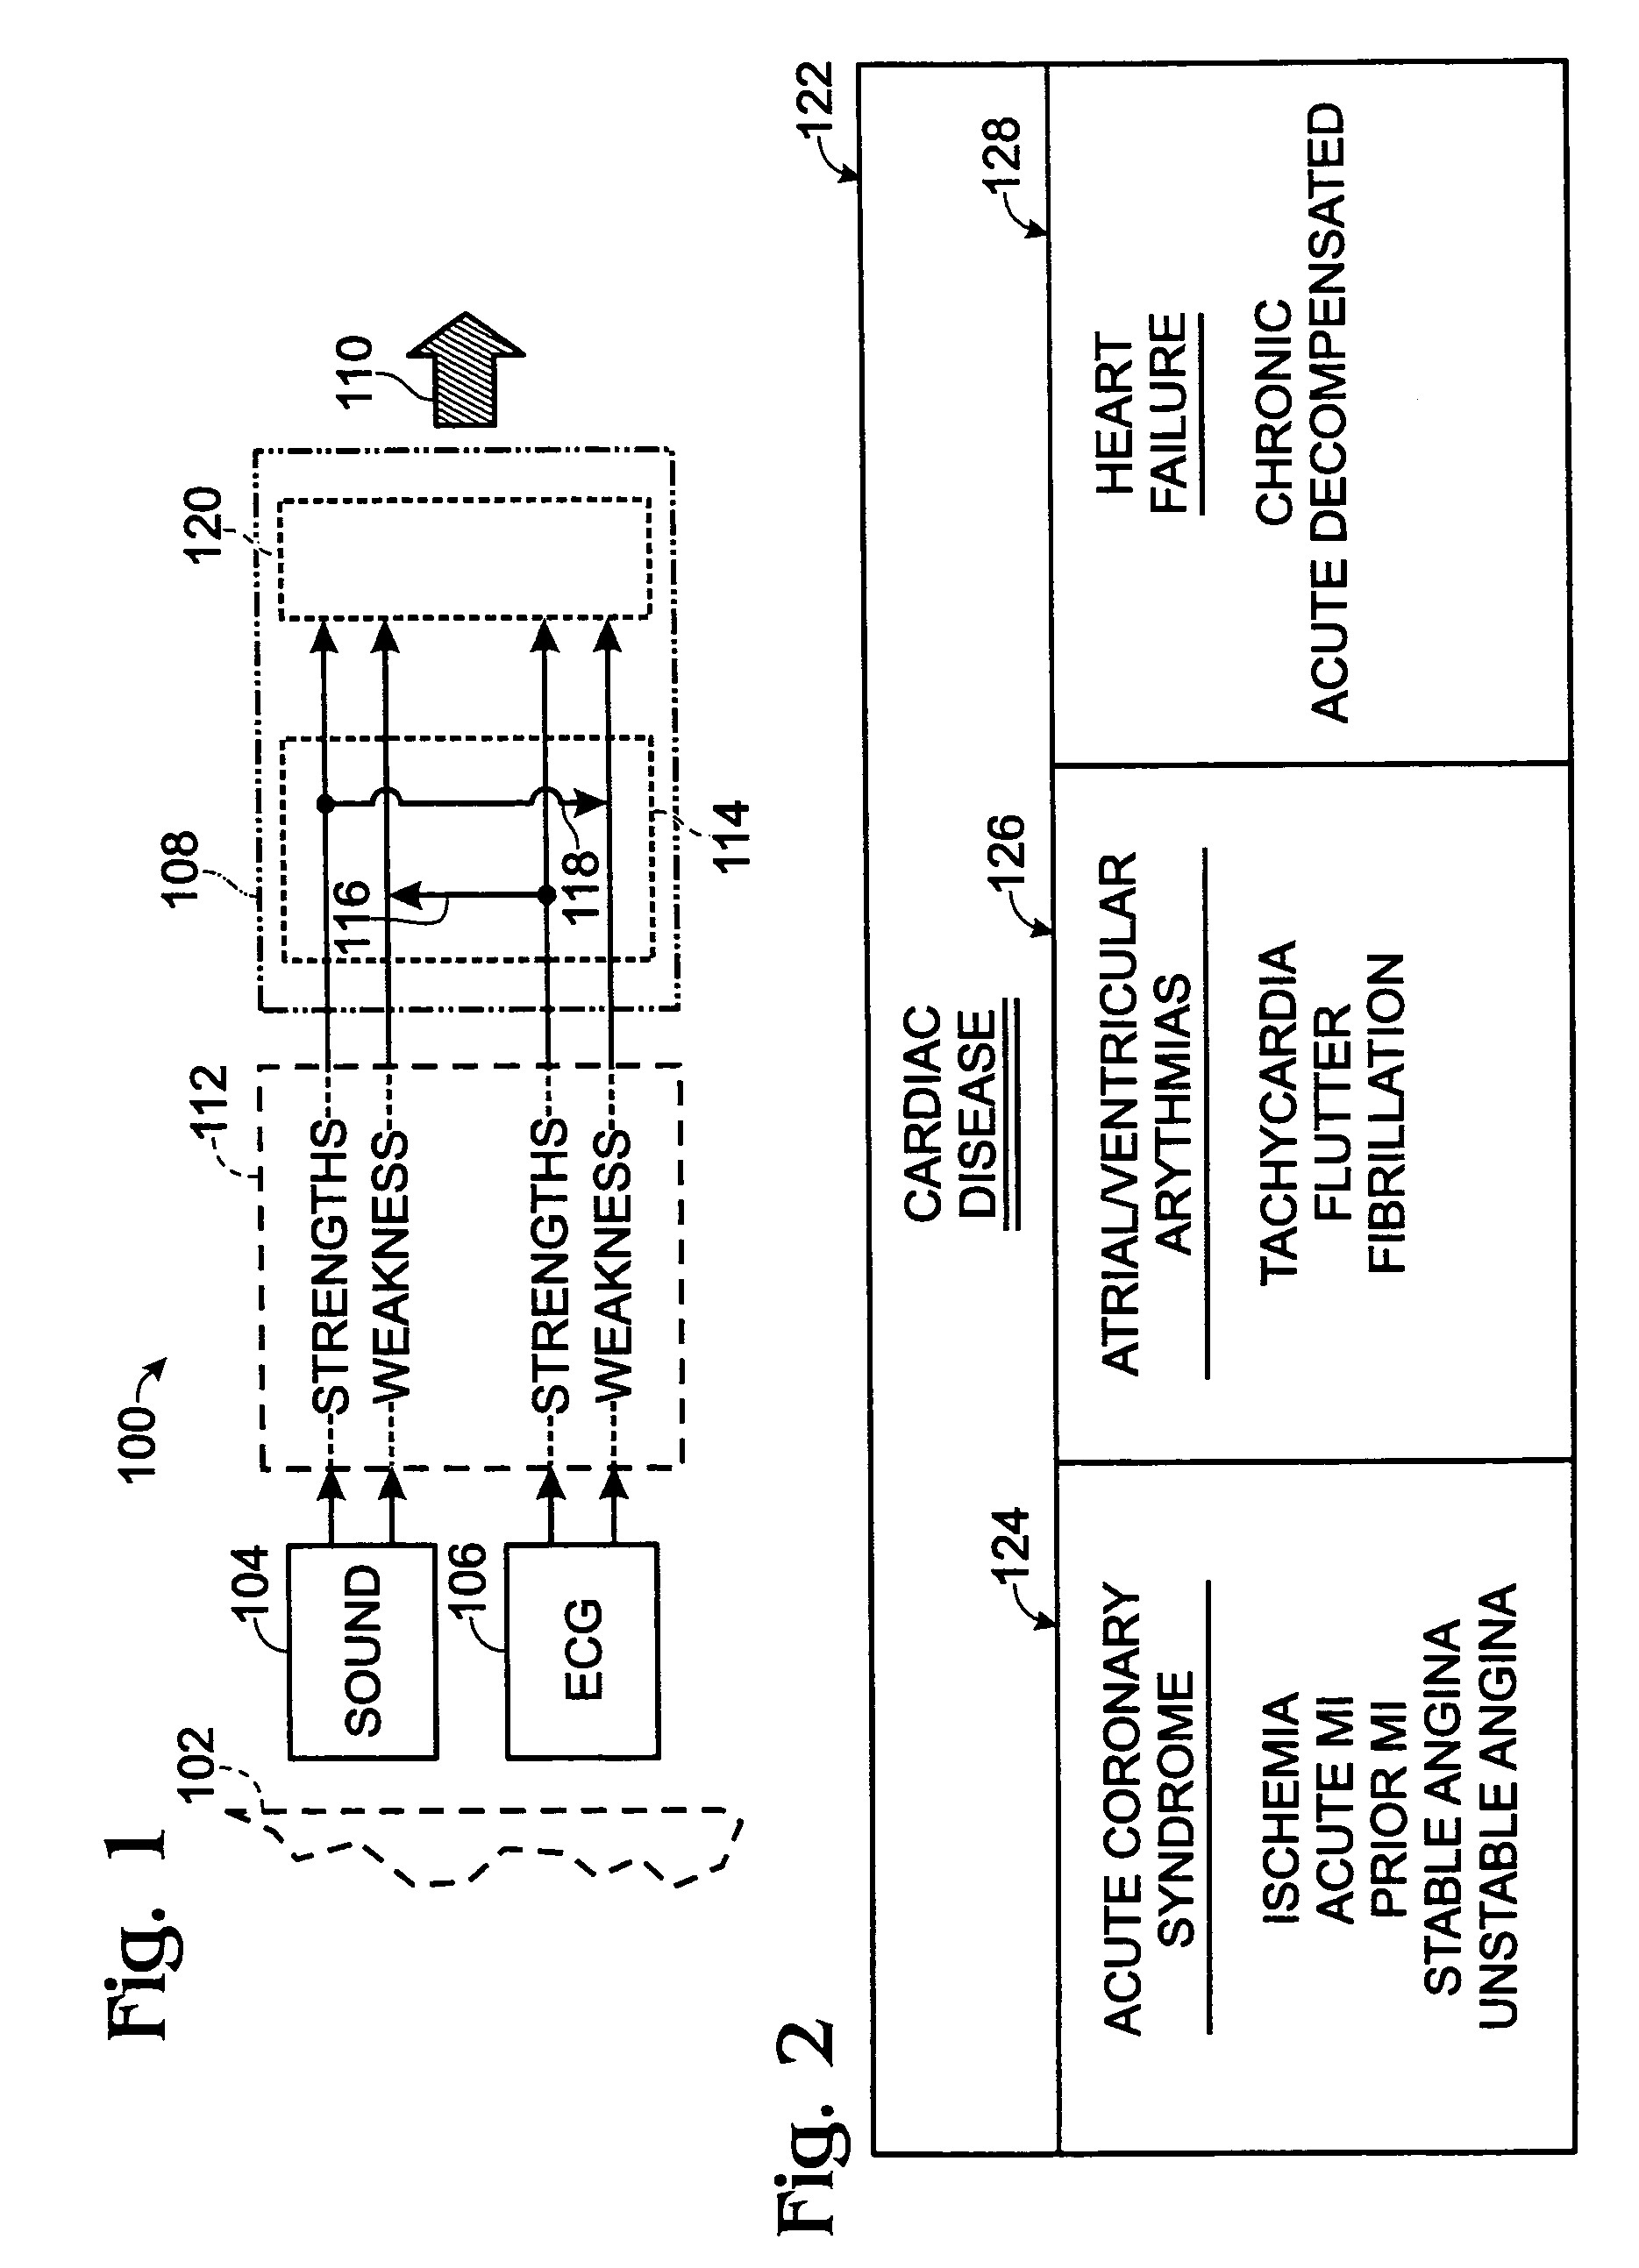 Method and system relating to monitoring and characterizing heart condition